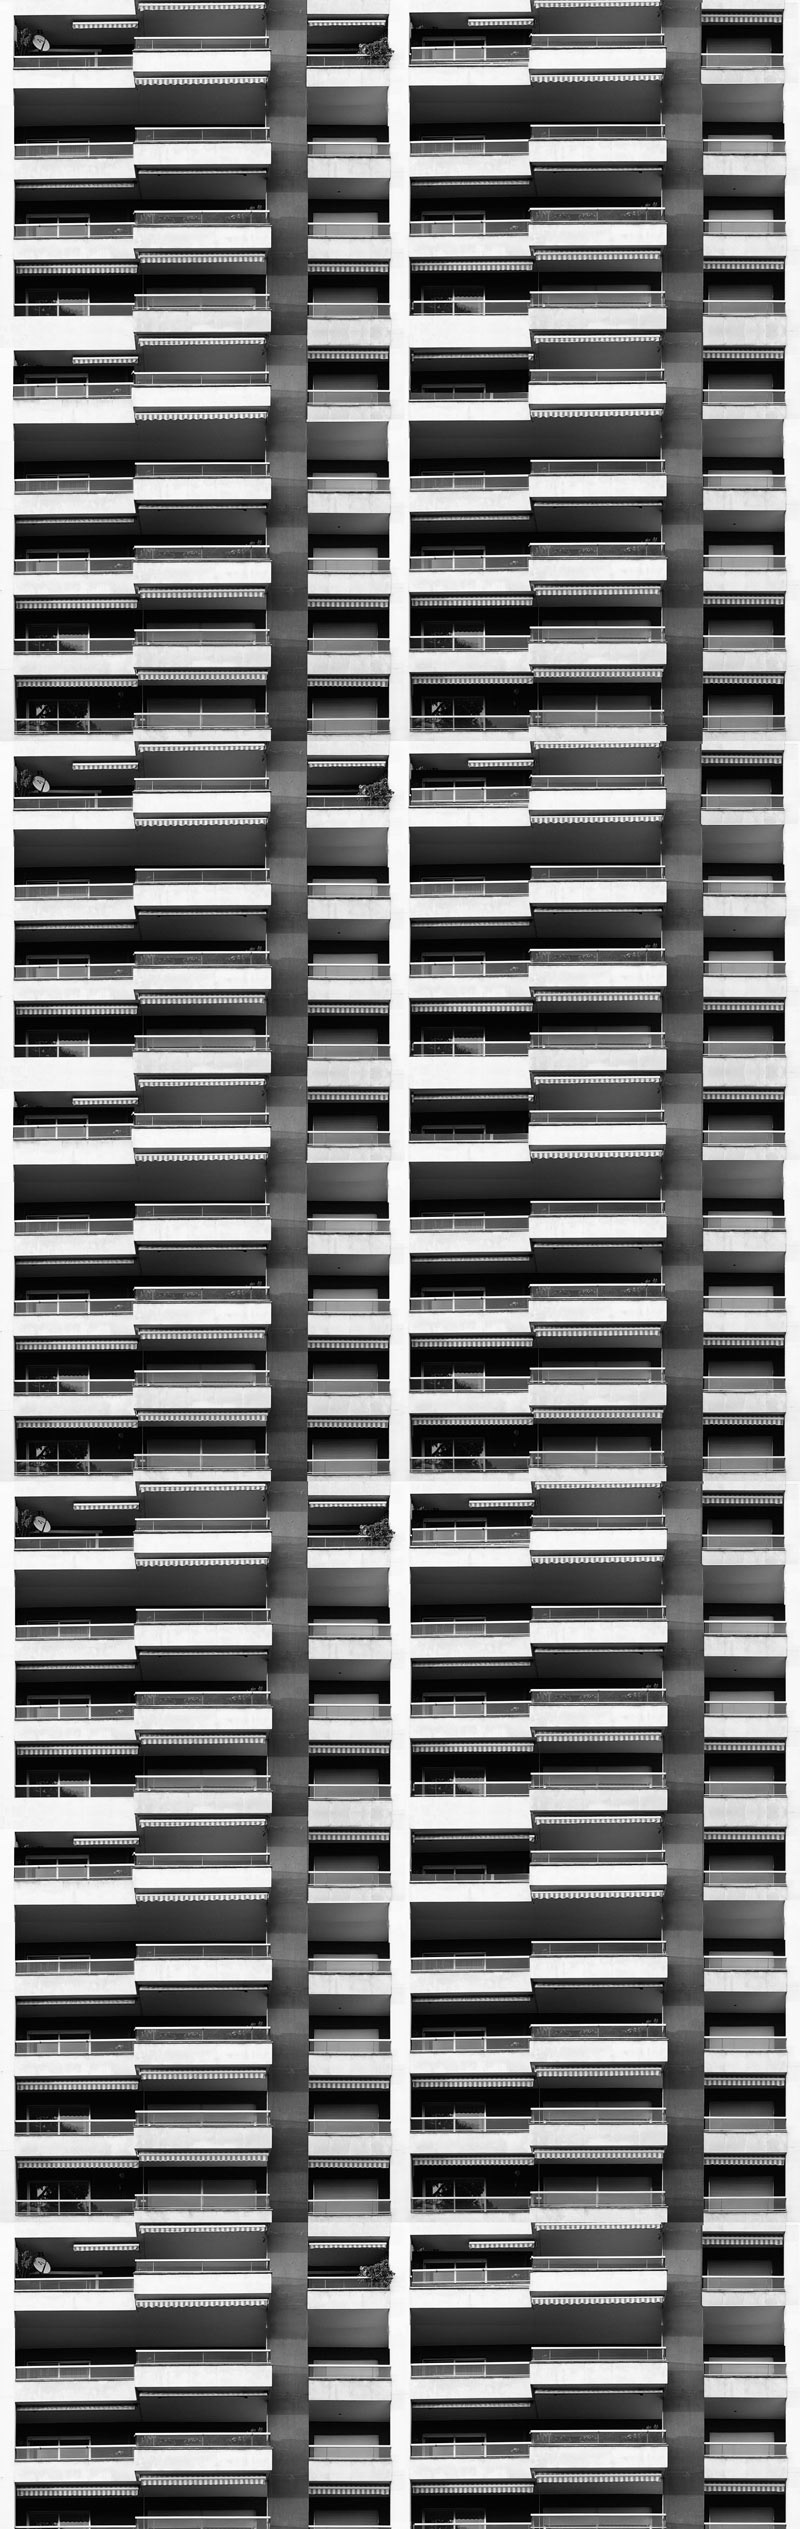 wallpaper black and white series Repetition Street city